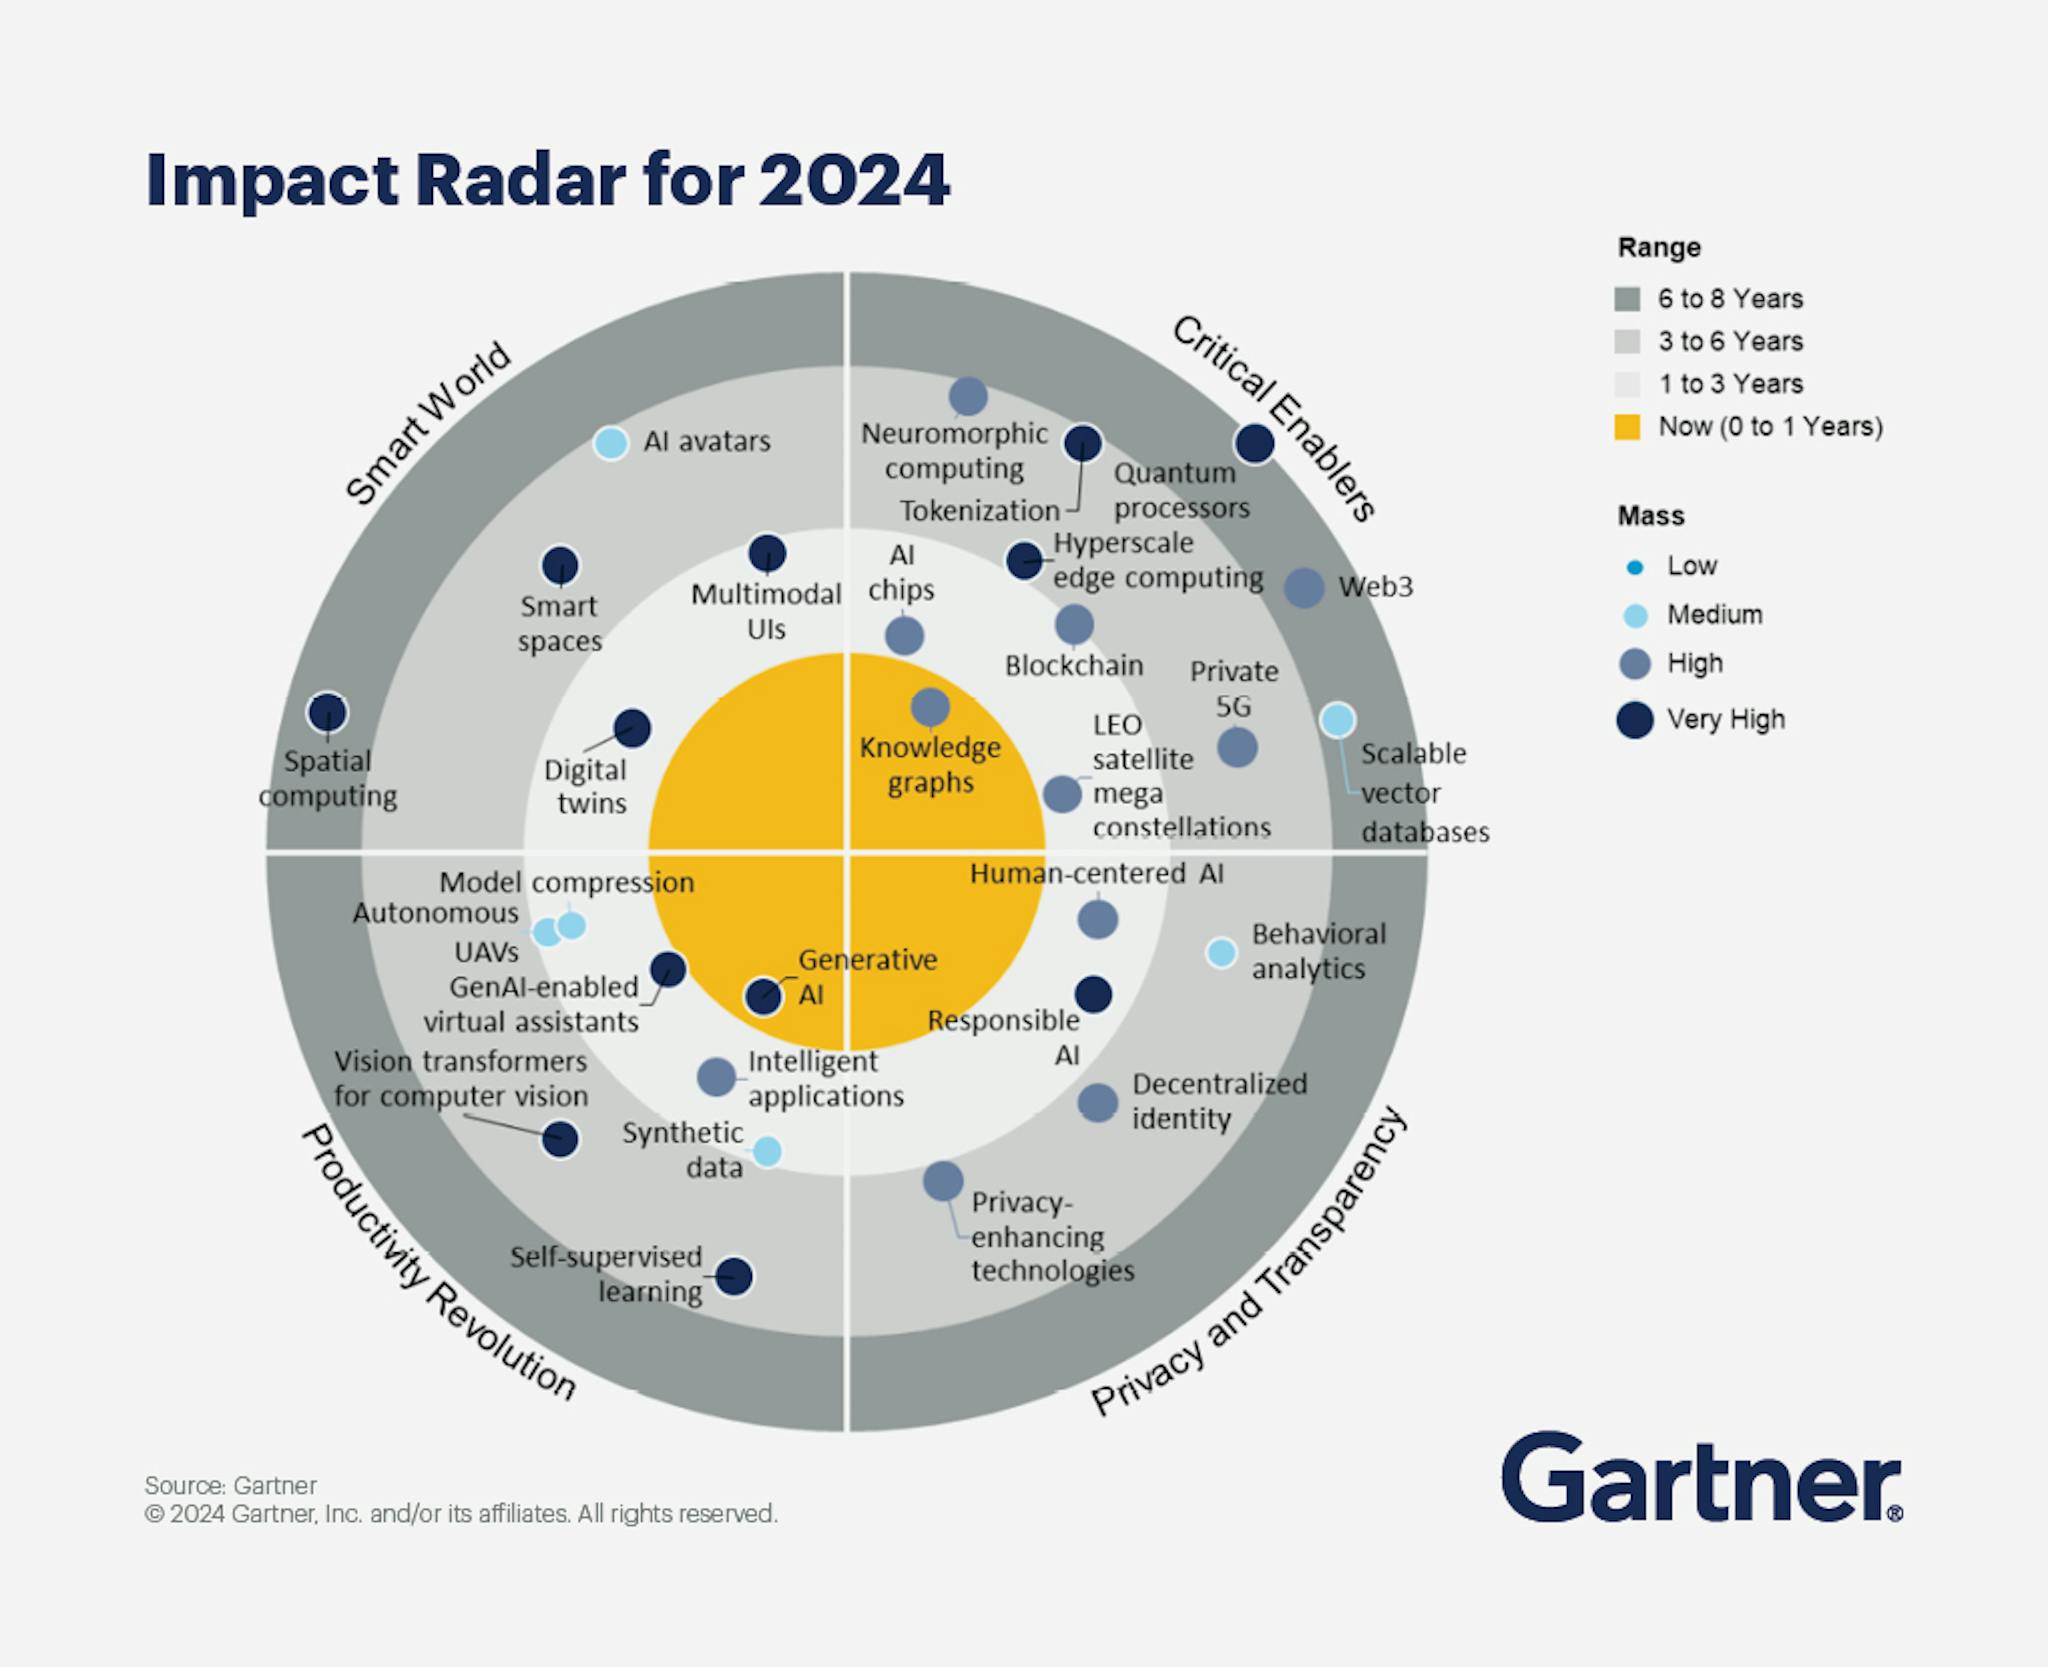 The Gartner Emerging Tech Impact Radar highlights the technologies and trends with the greatest potential to disrupt a broad cross-section of markets